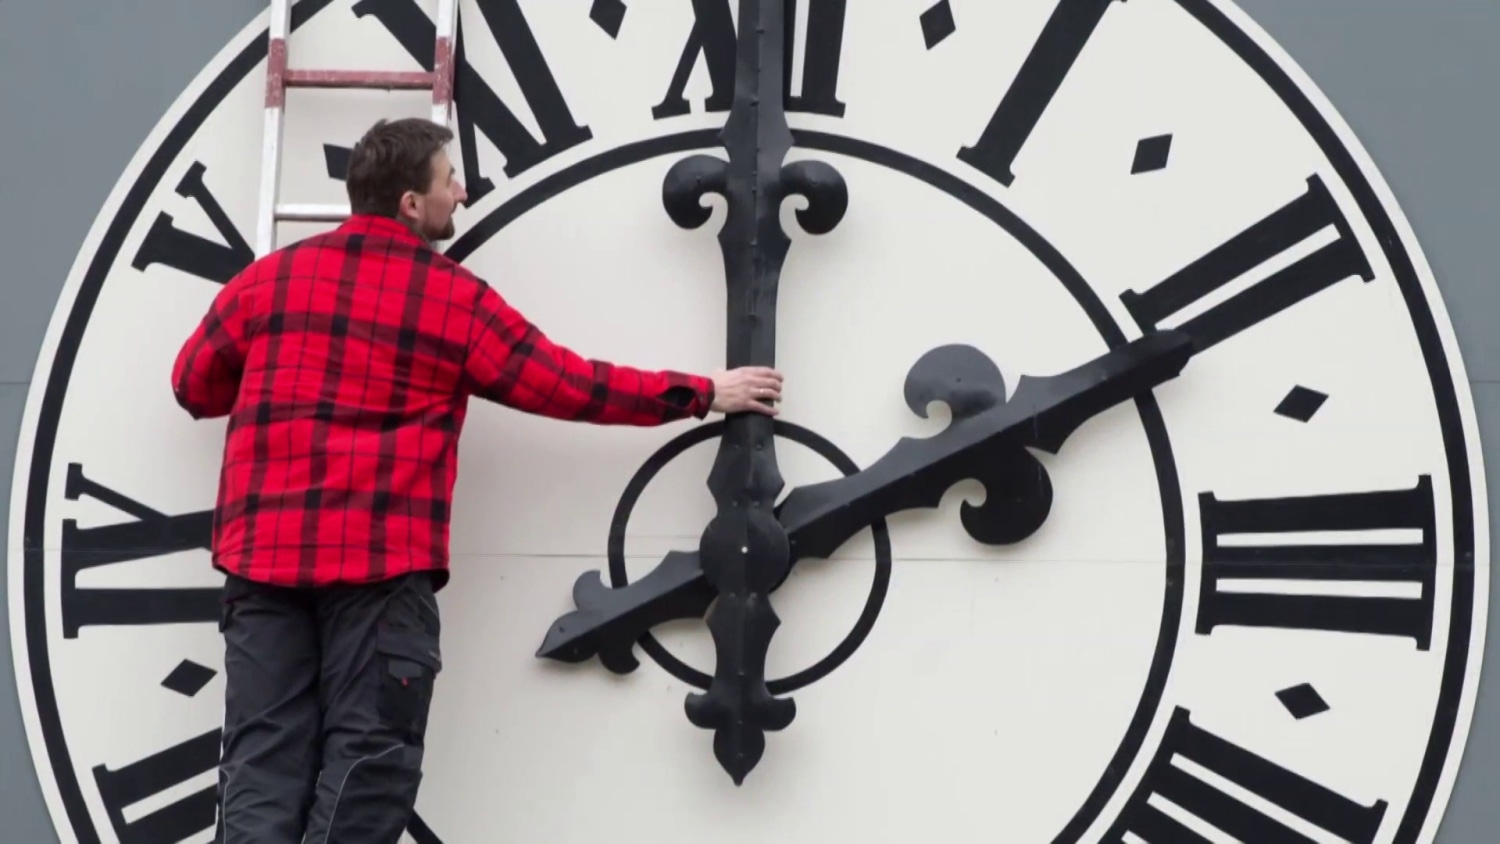 Daylight Savings Time 2022: Some States Want Permanent DST